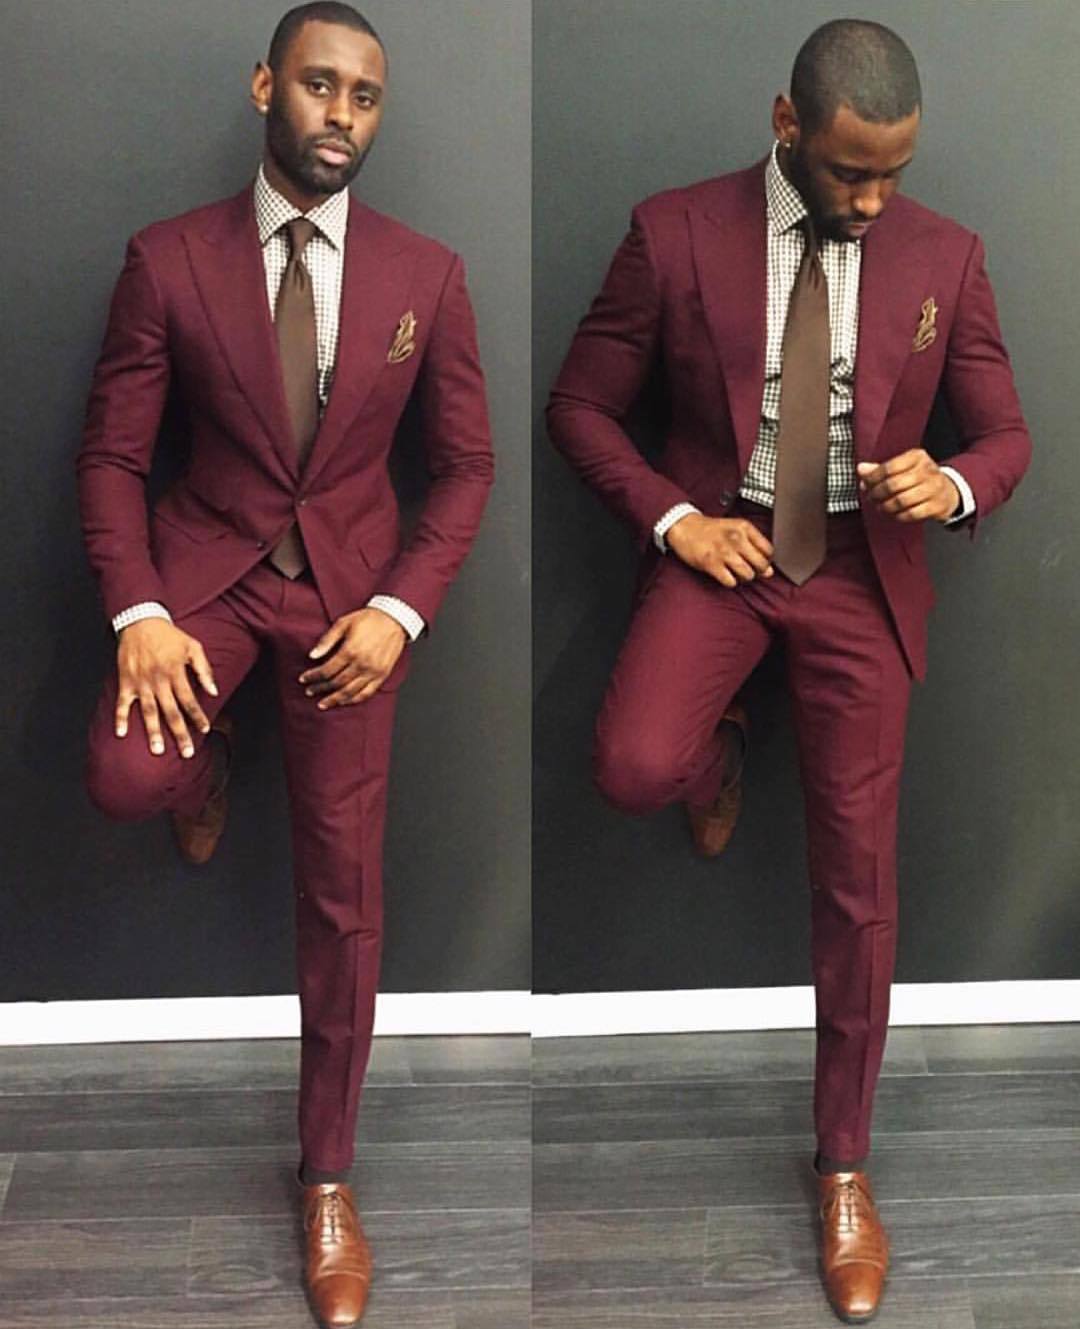 Fifty Shades of Suits — Love red suits 🎩 #class #classy #suit  #suitandtie...